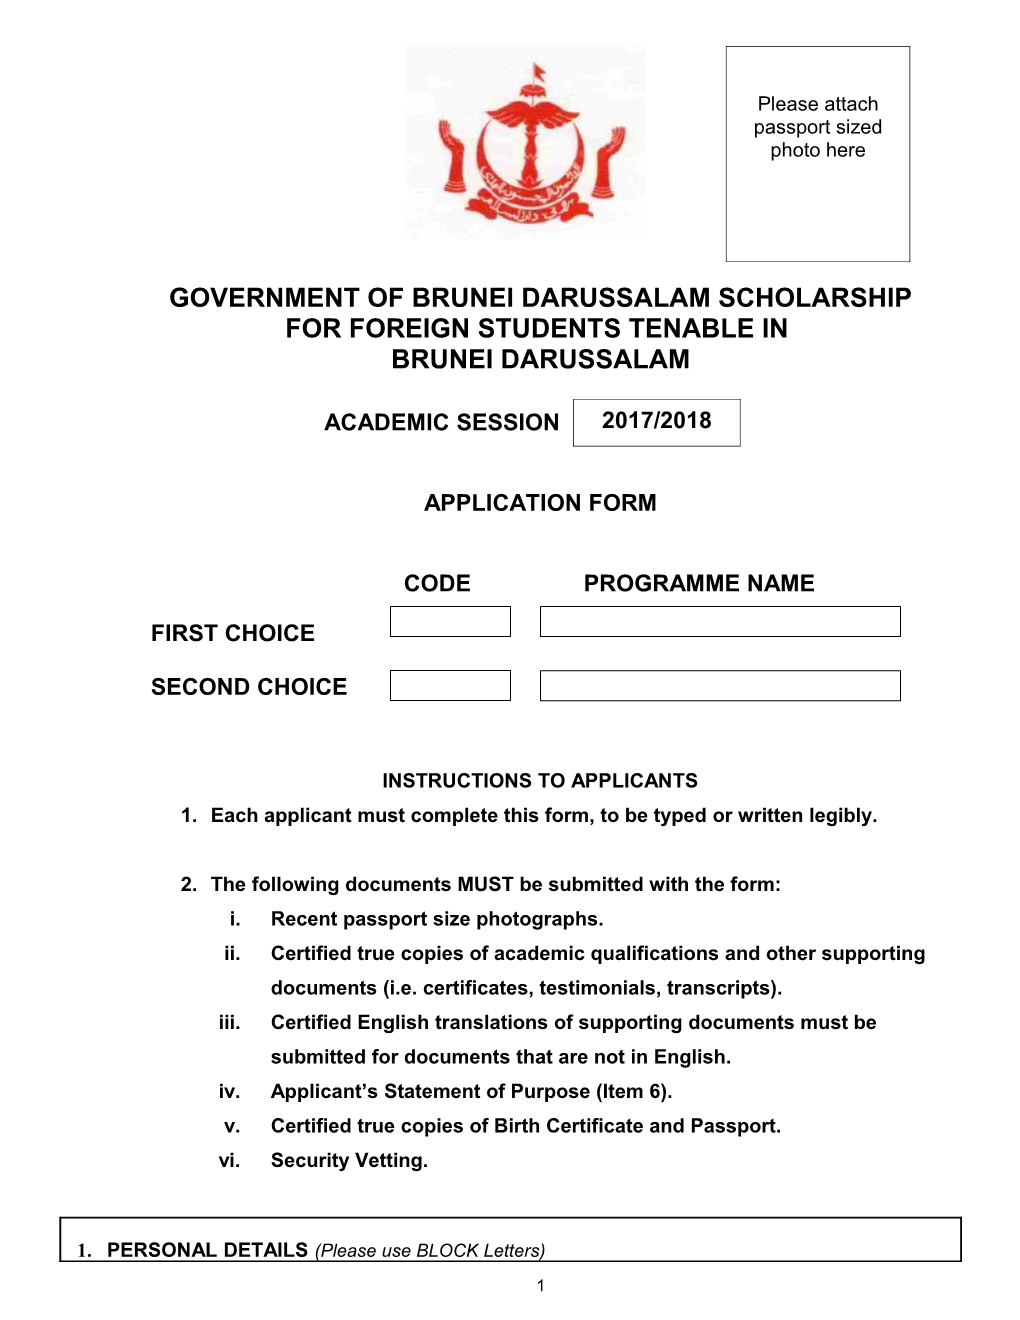 Government of Brunei Darussalam Scholarship for Foreign Students Tenable In